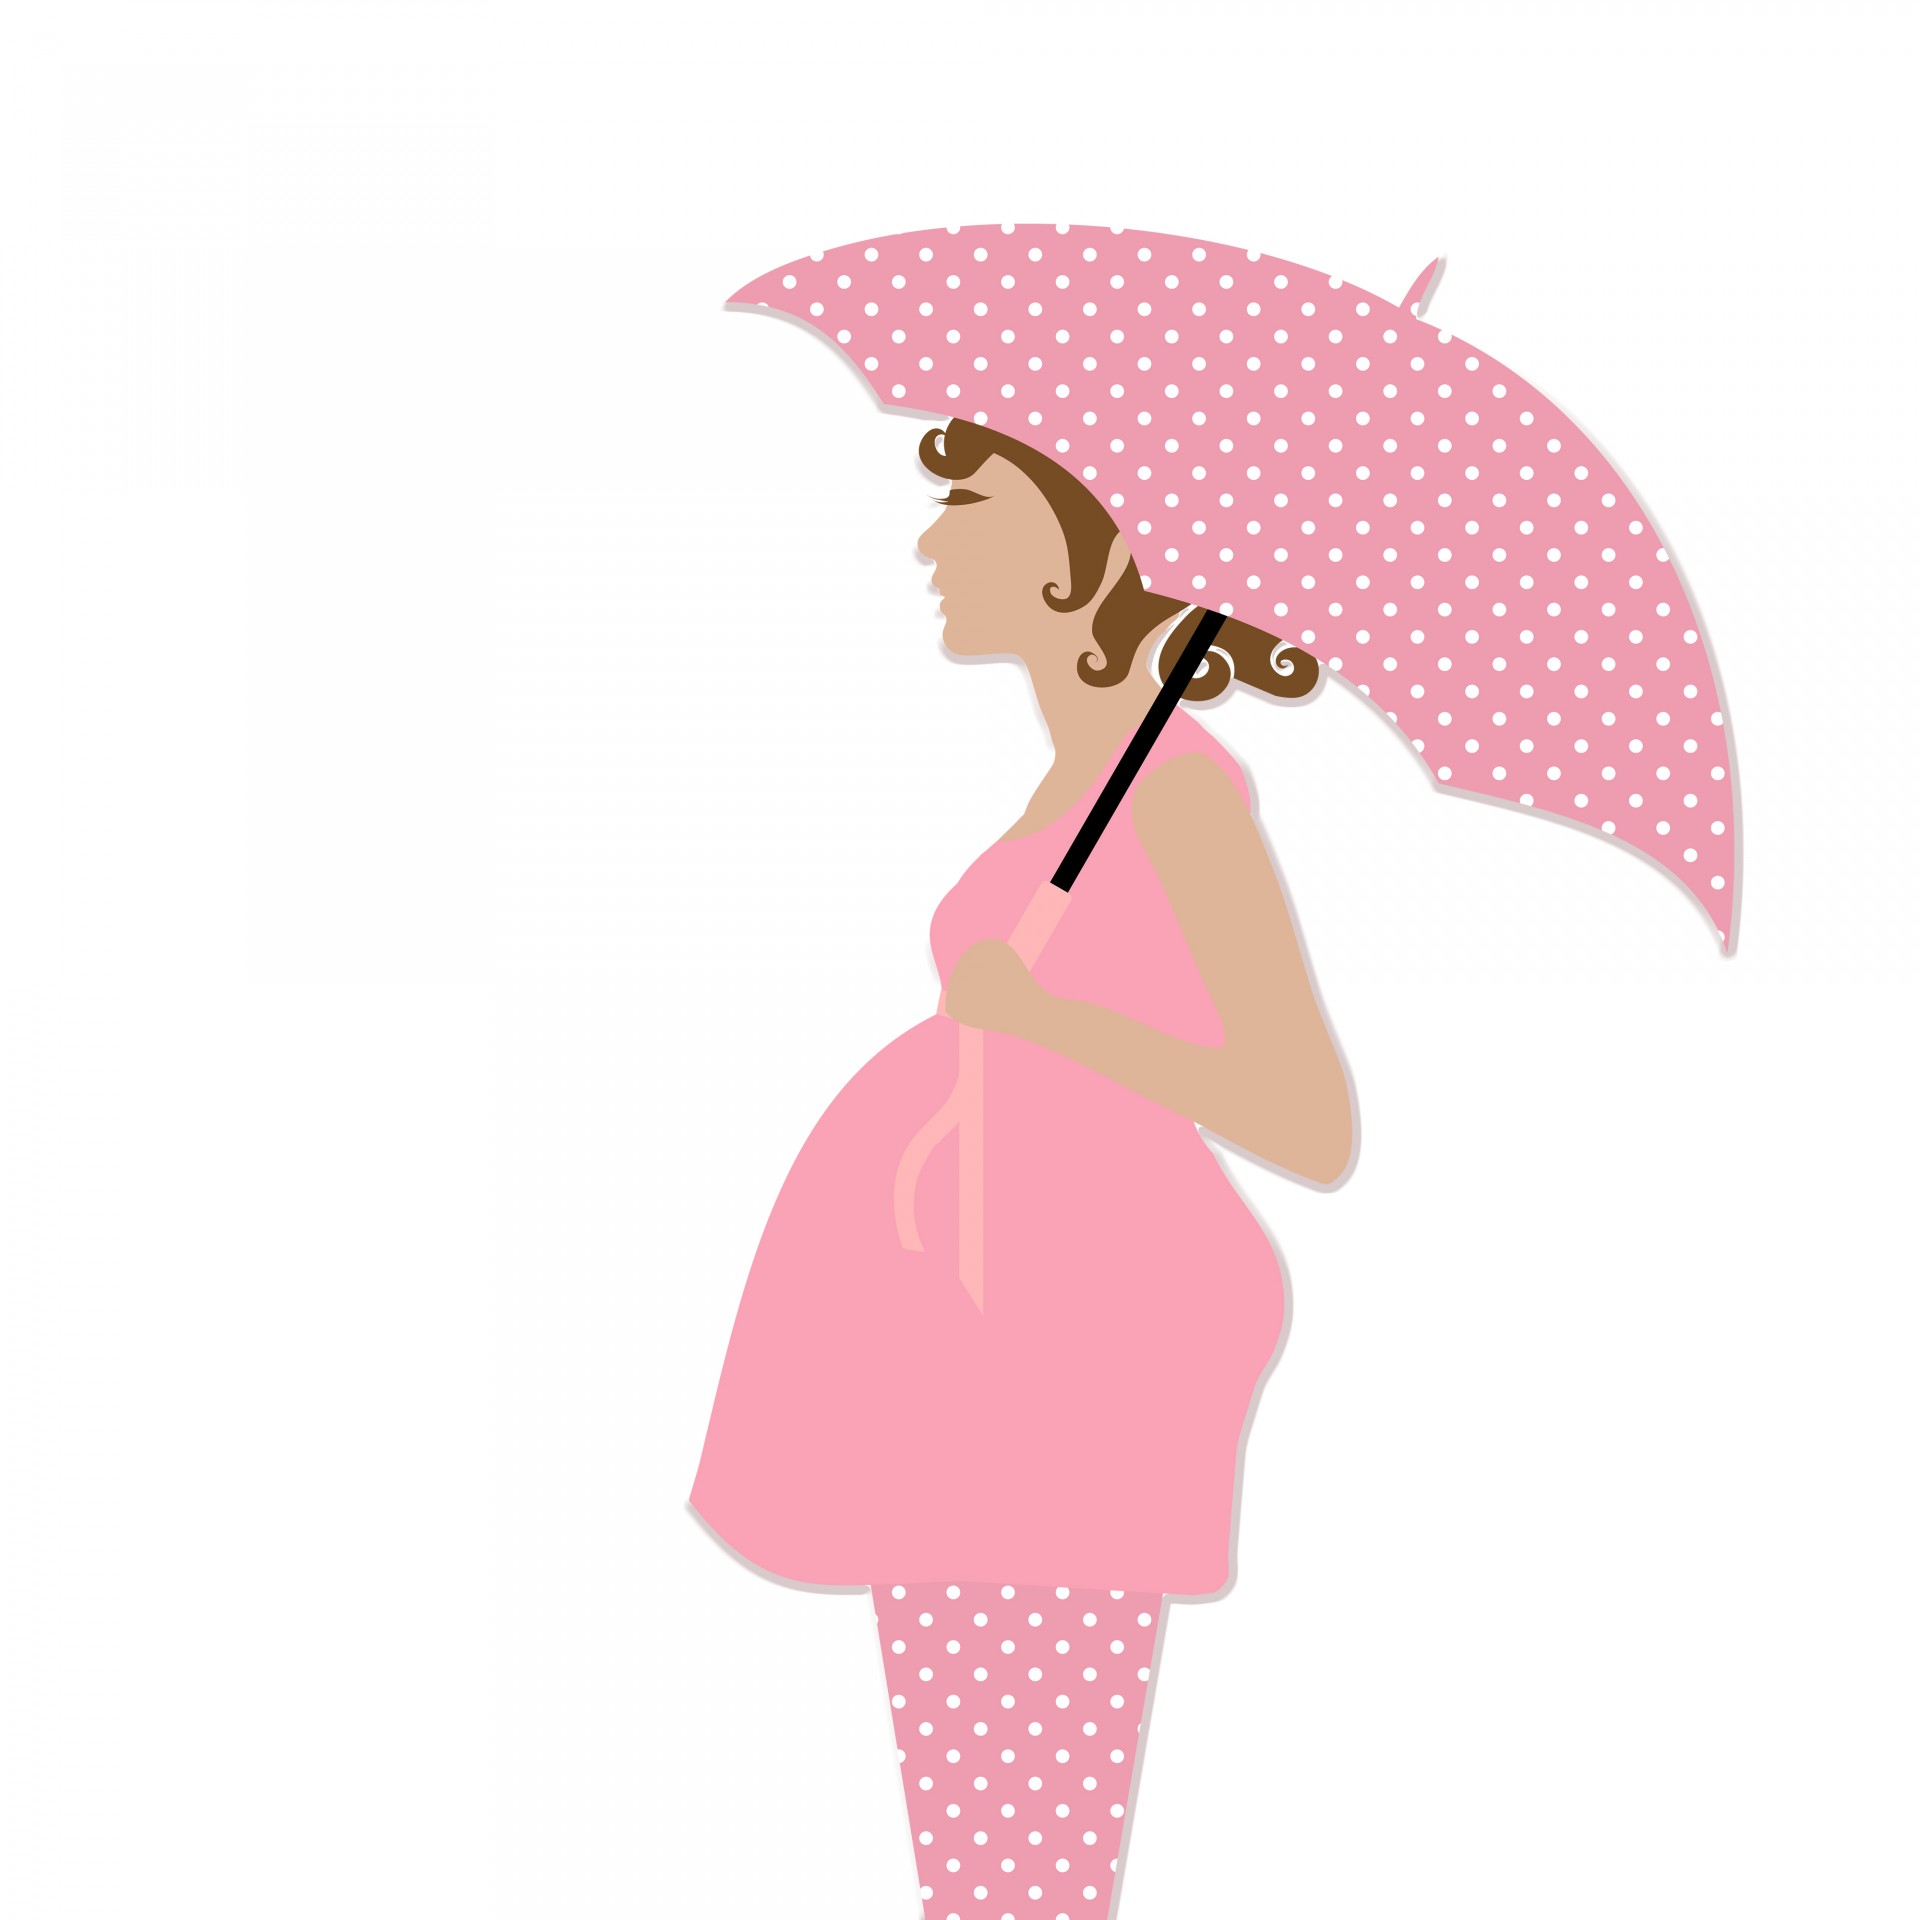 Expecting woman female free. Pregnancy clipart pregnant lady